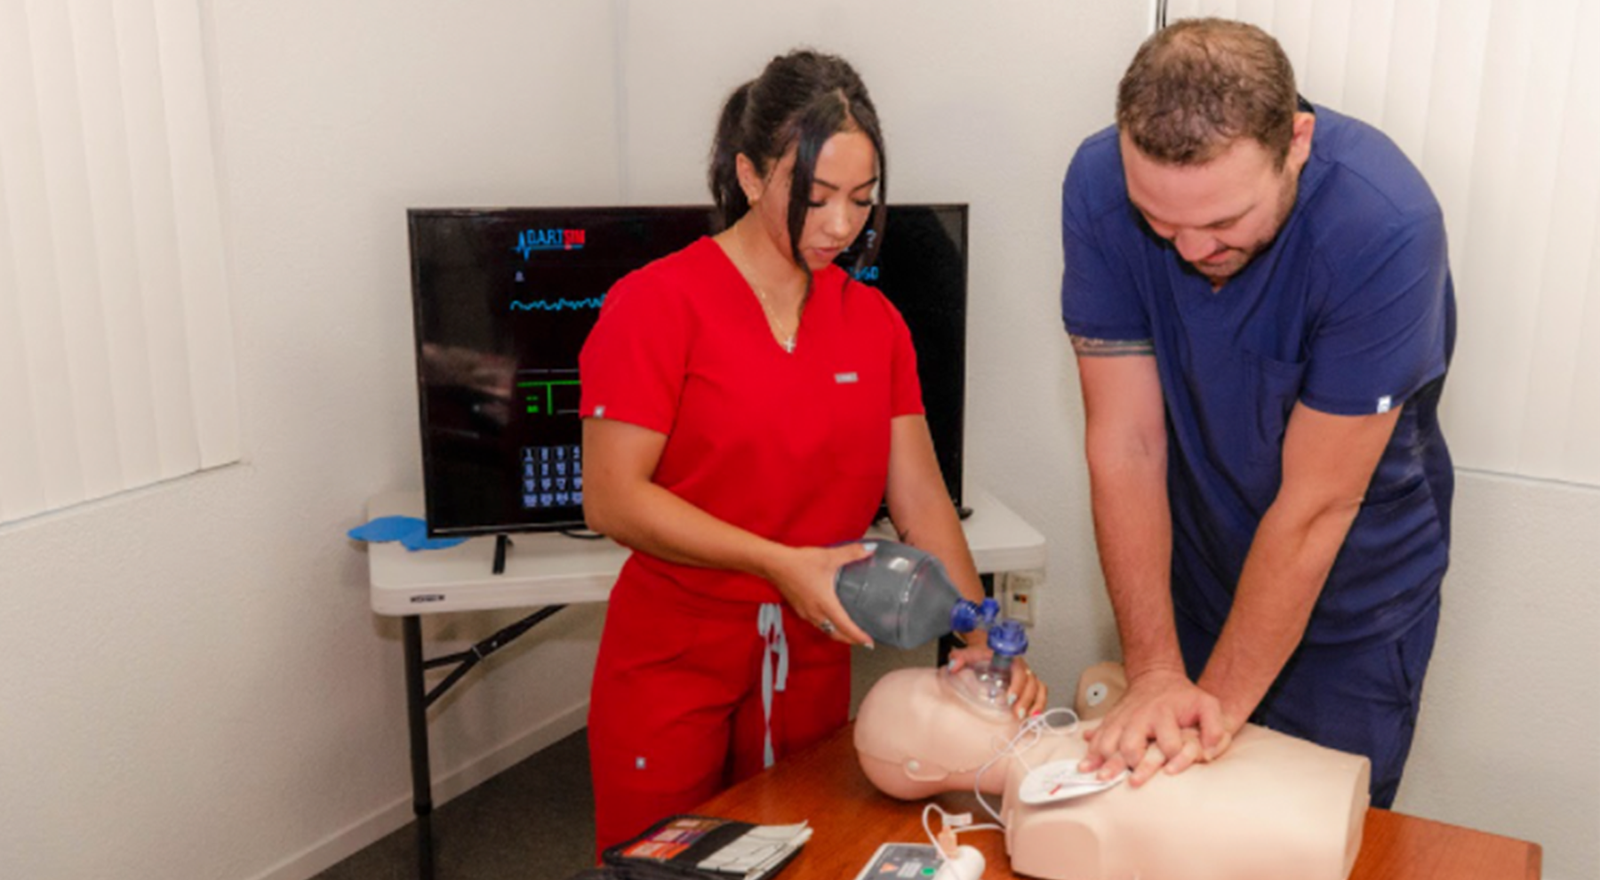 elite medical training enrolled students on how to be certified in basic life support